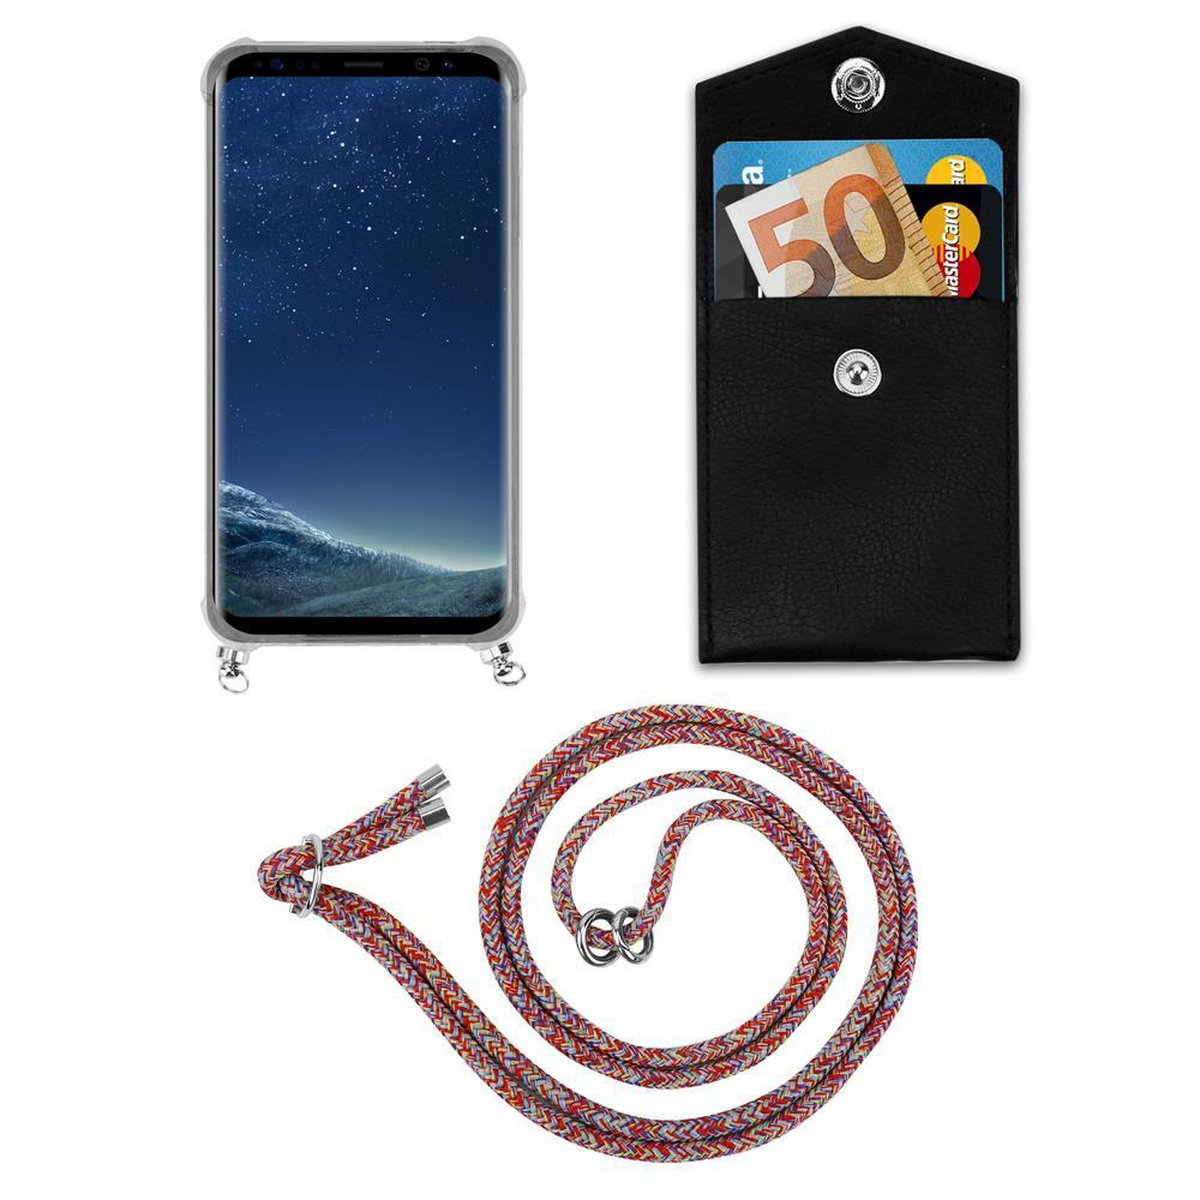 CADORABO Handy Kette mit COLORFUL abnehmbarer Hülle, Galaxy PLUS, Backcover, und S8 Samsung, Kordel Silber Band PARROT Ringen